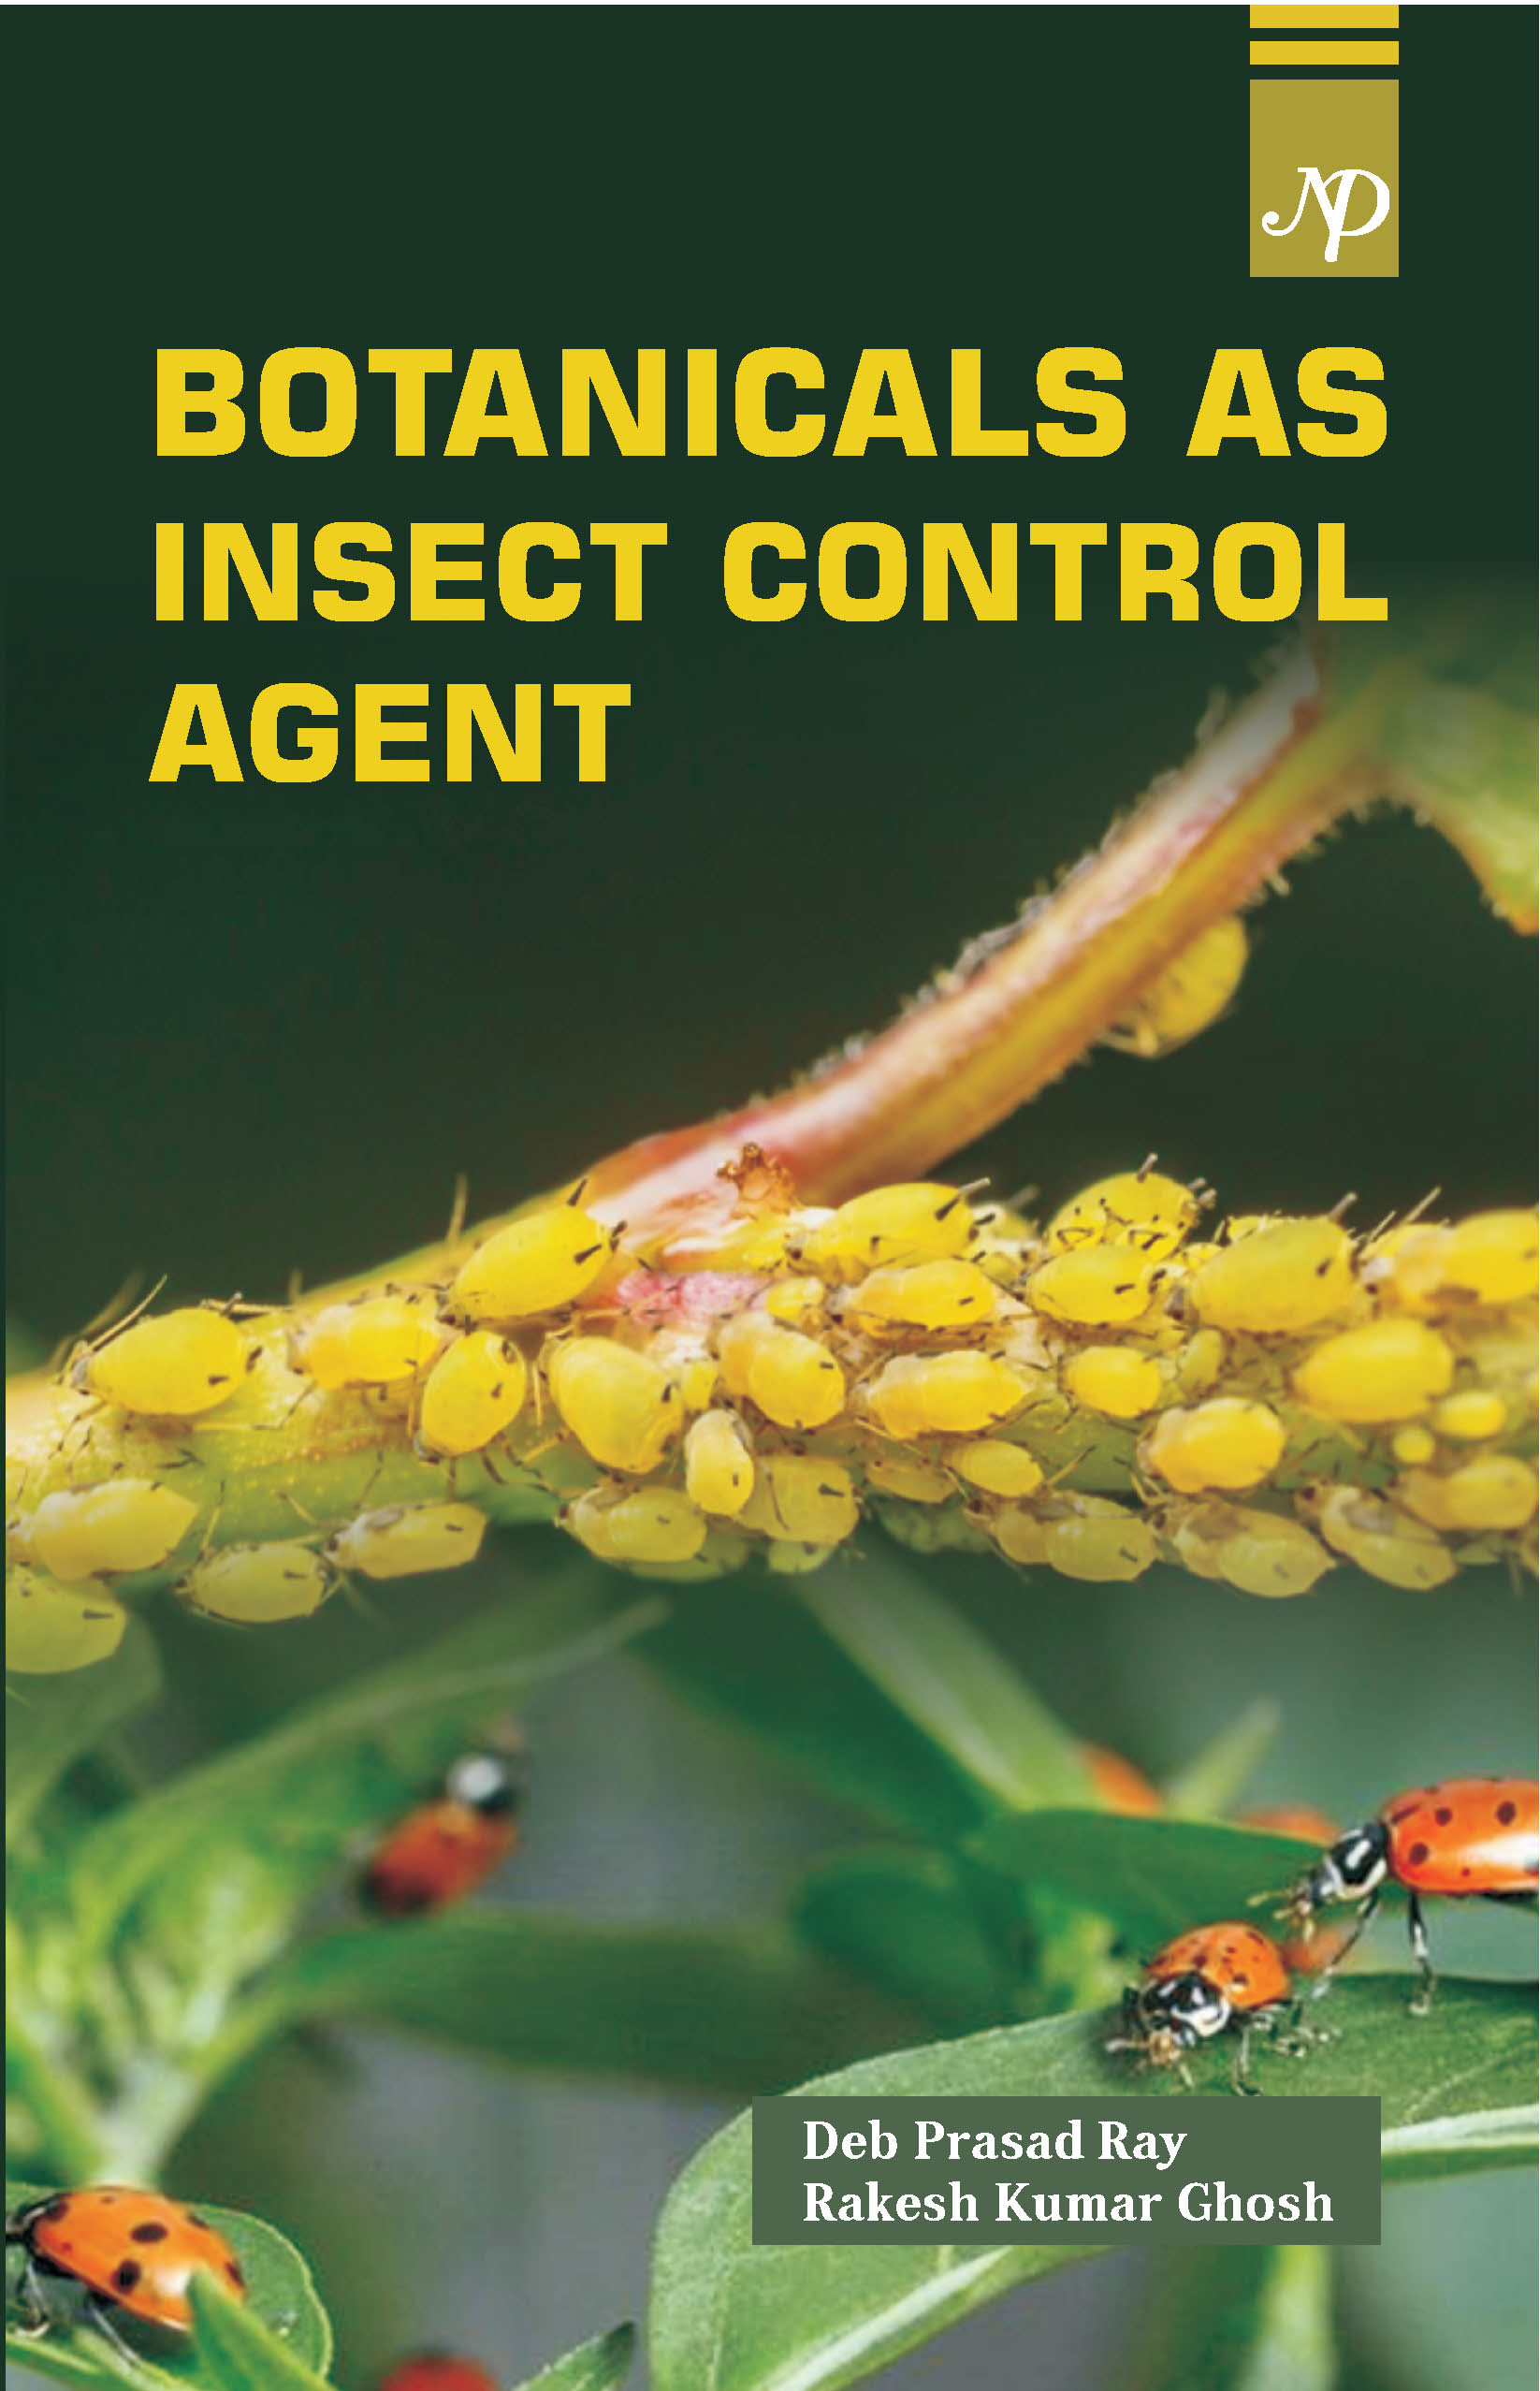 Botanicals as insect control agent.jpg